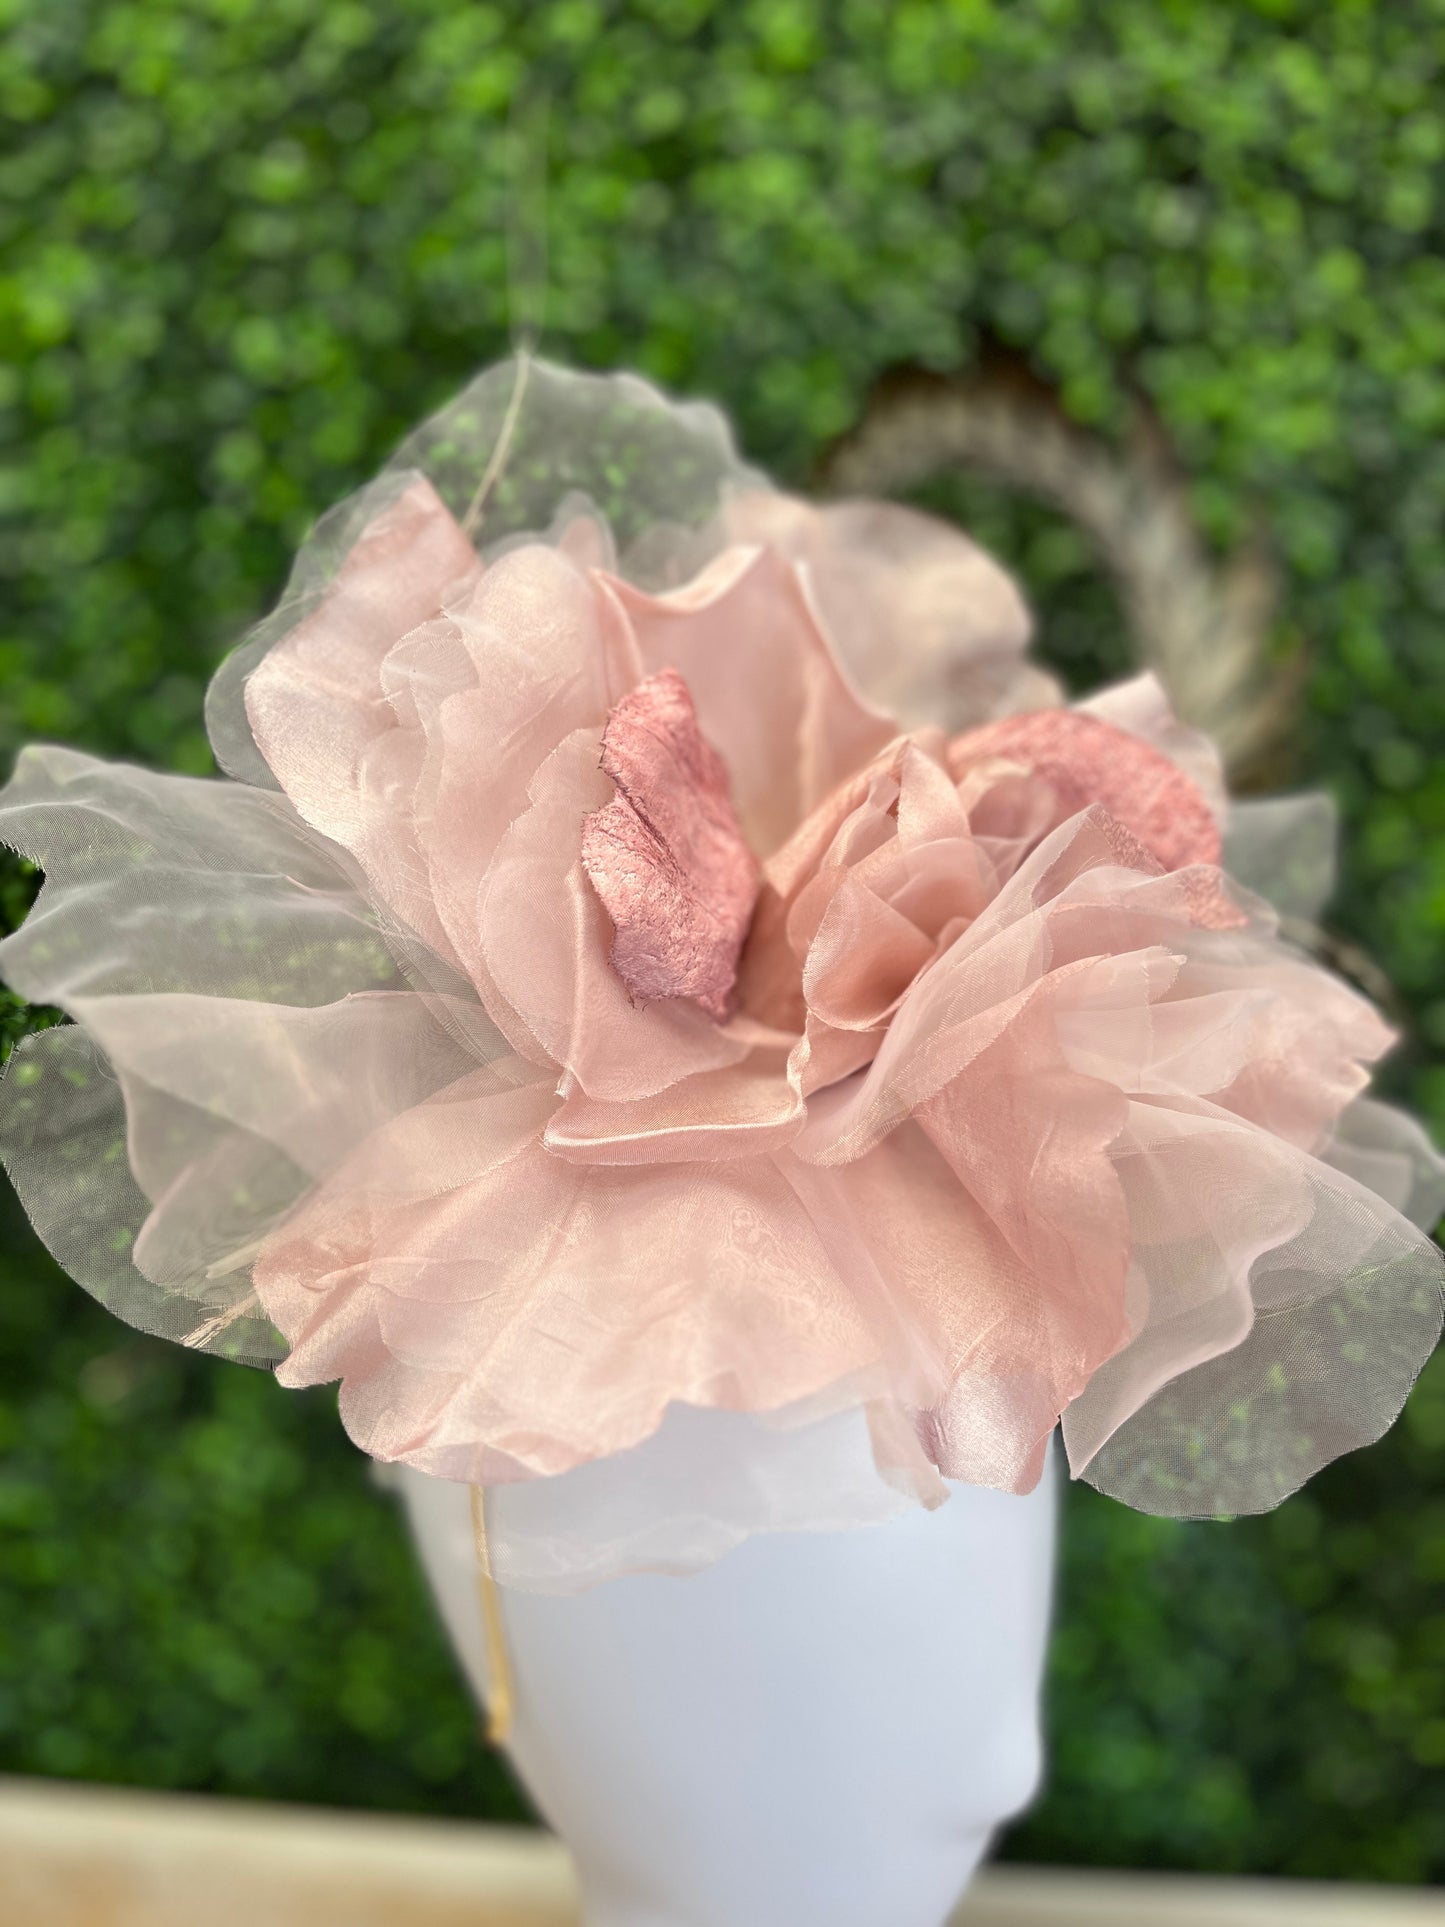 Handmade Blush with Natural Pheasant Feathers Fascinator Hat